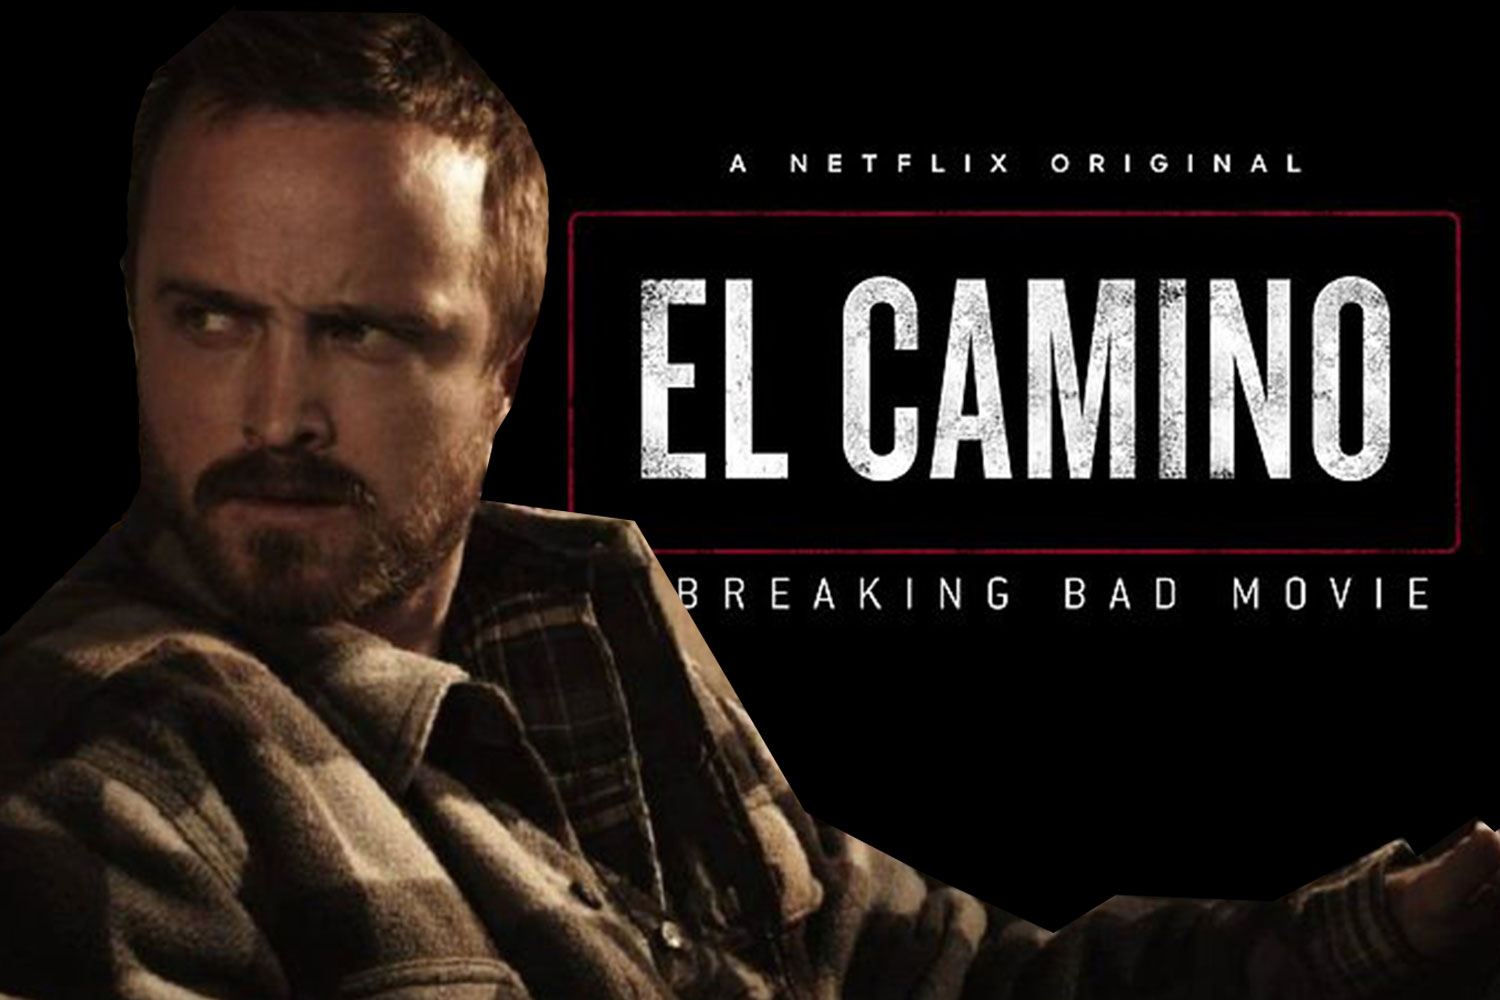 The 'Breaking Bad' movie 'El Camino' new trailer aired during an Emmys